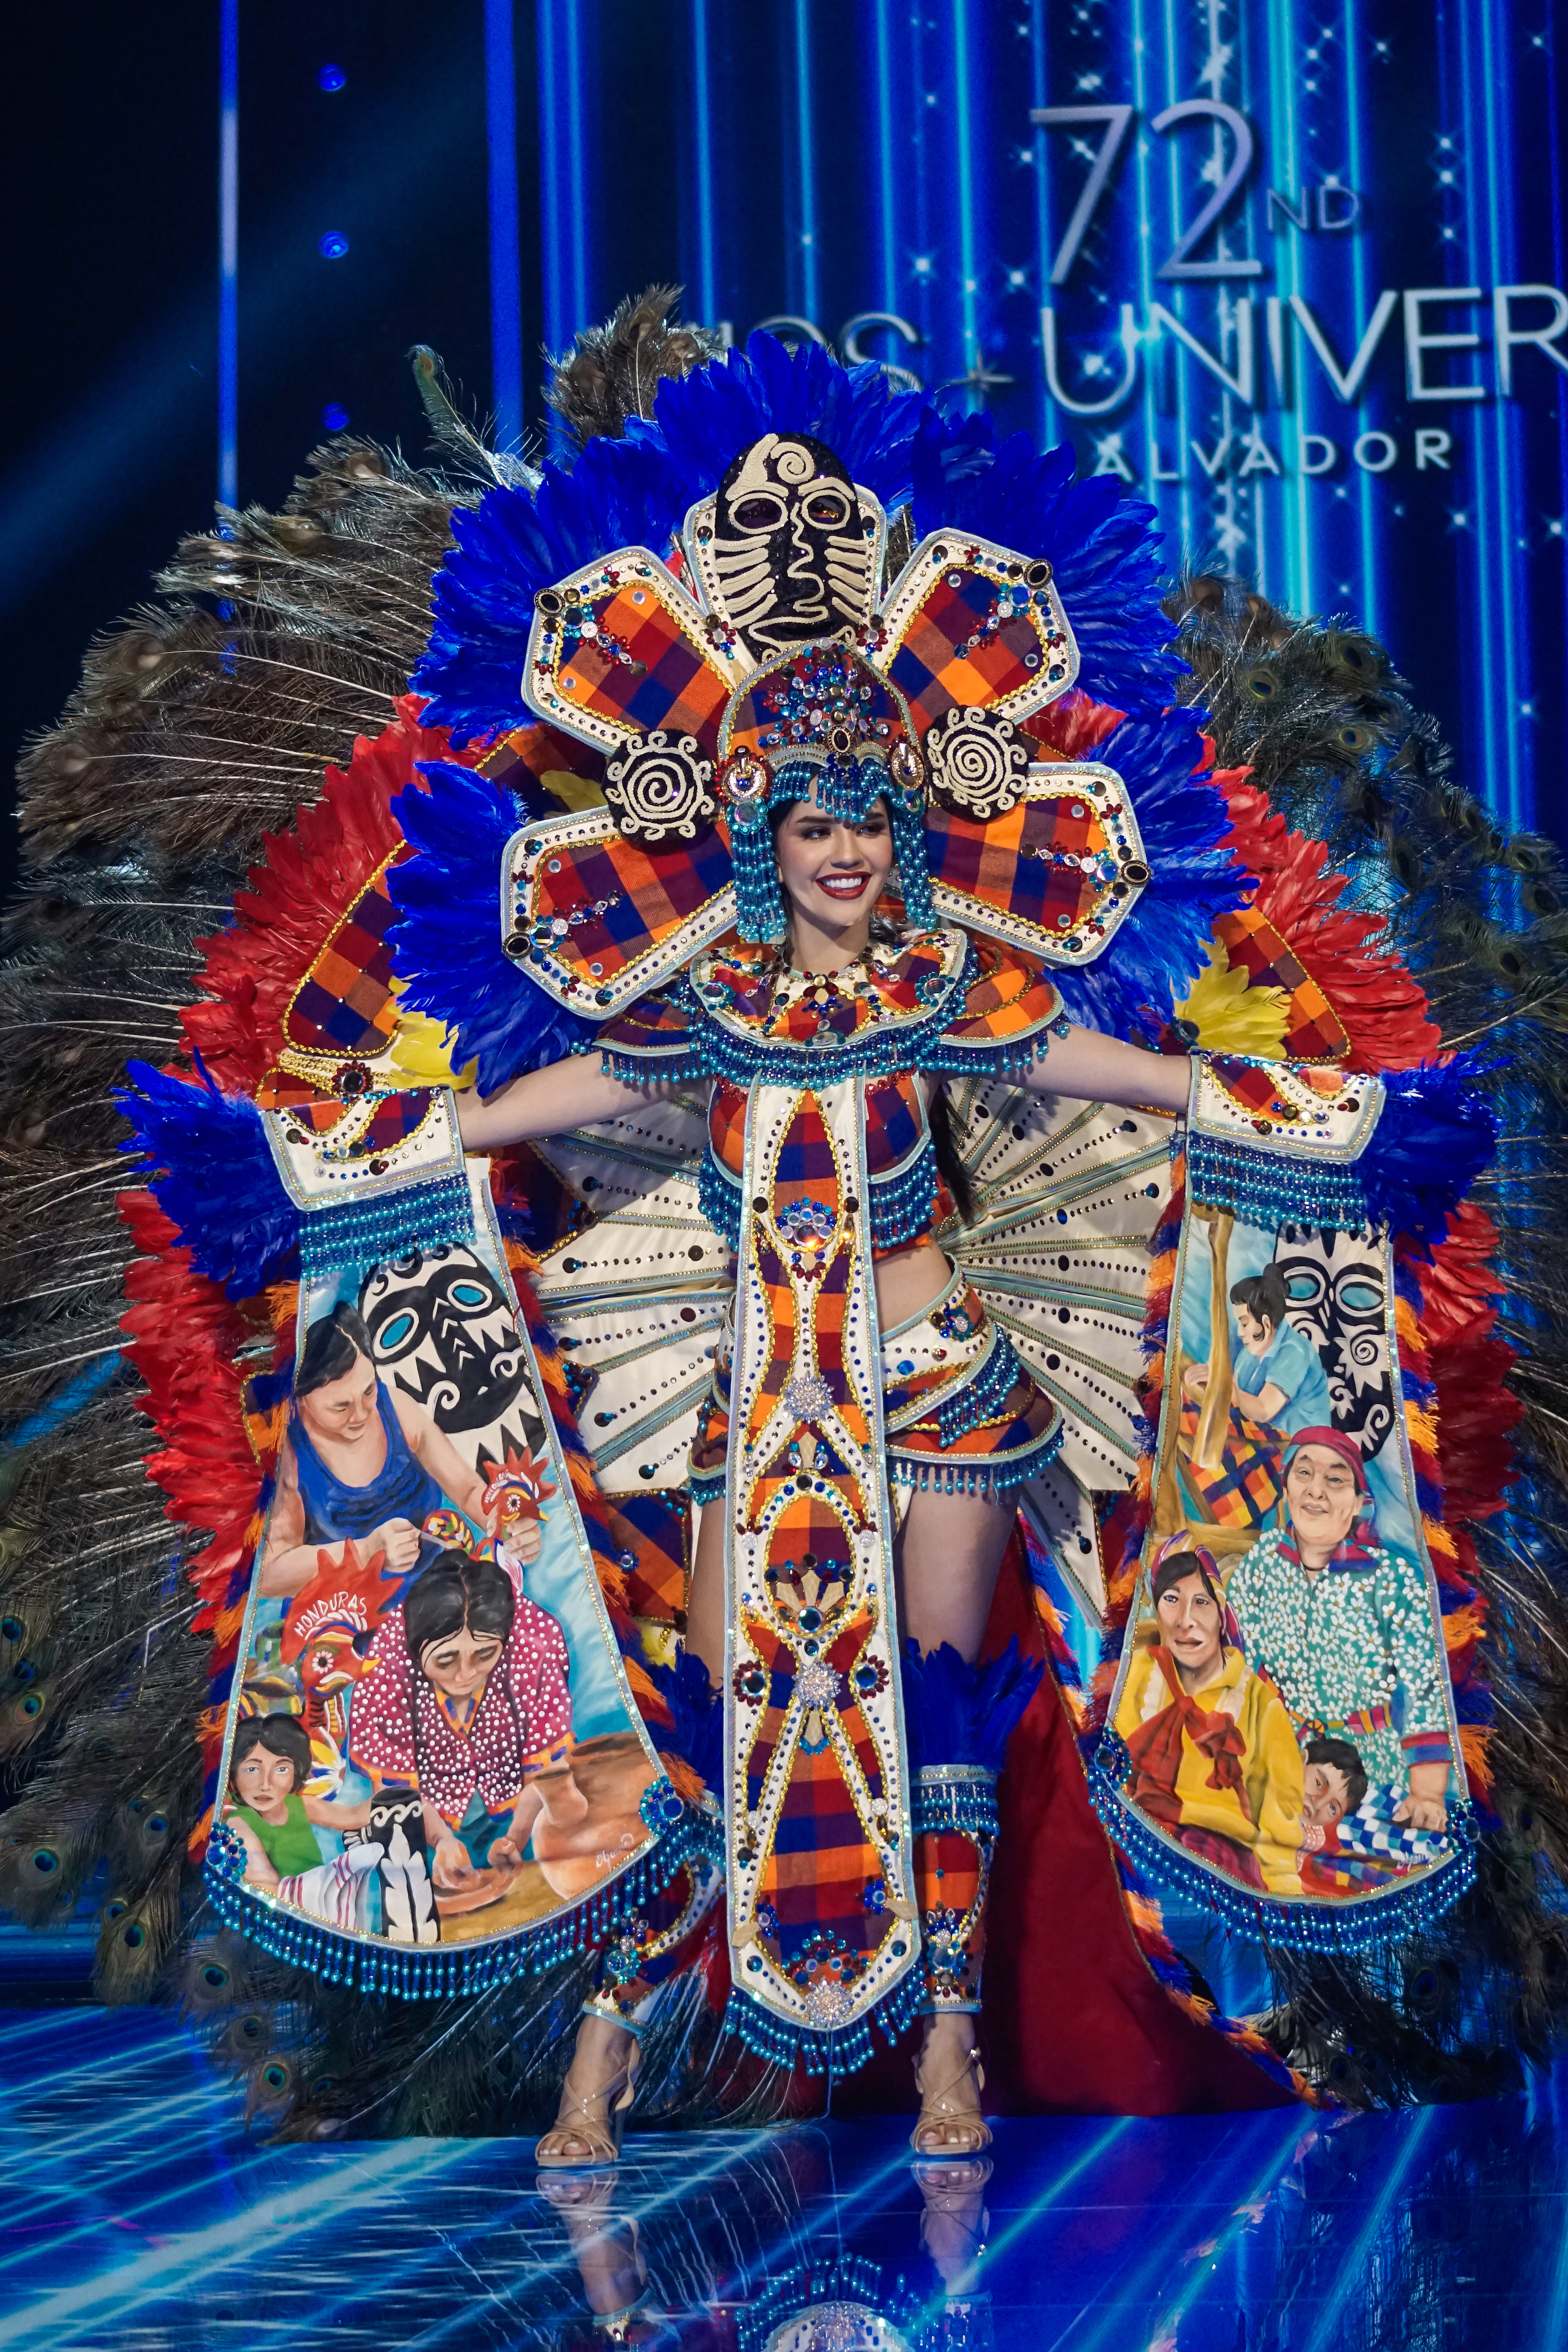 SAN SALVADOR, EL SALVADOR - NOVEMBER 16: Miss Honduras Zuheilyn Clemente during the 72nd Miss Universe Competition National Costume Show on November 16, 2023 in San Salvador, El Salvador. (Photo by Alex Peña/Getty Images)